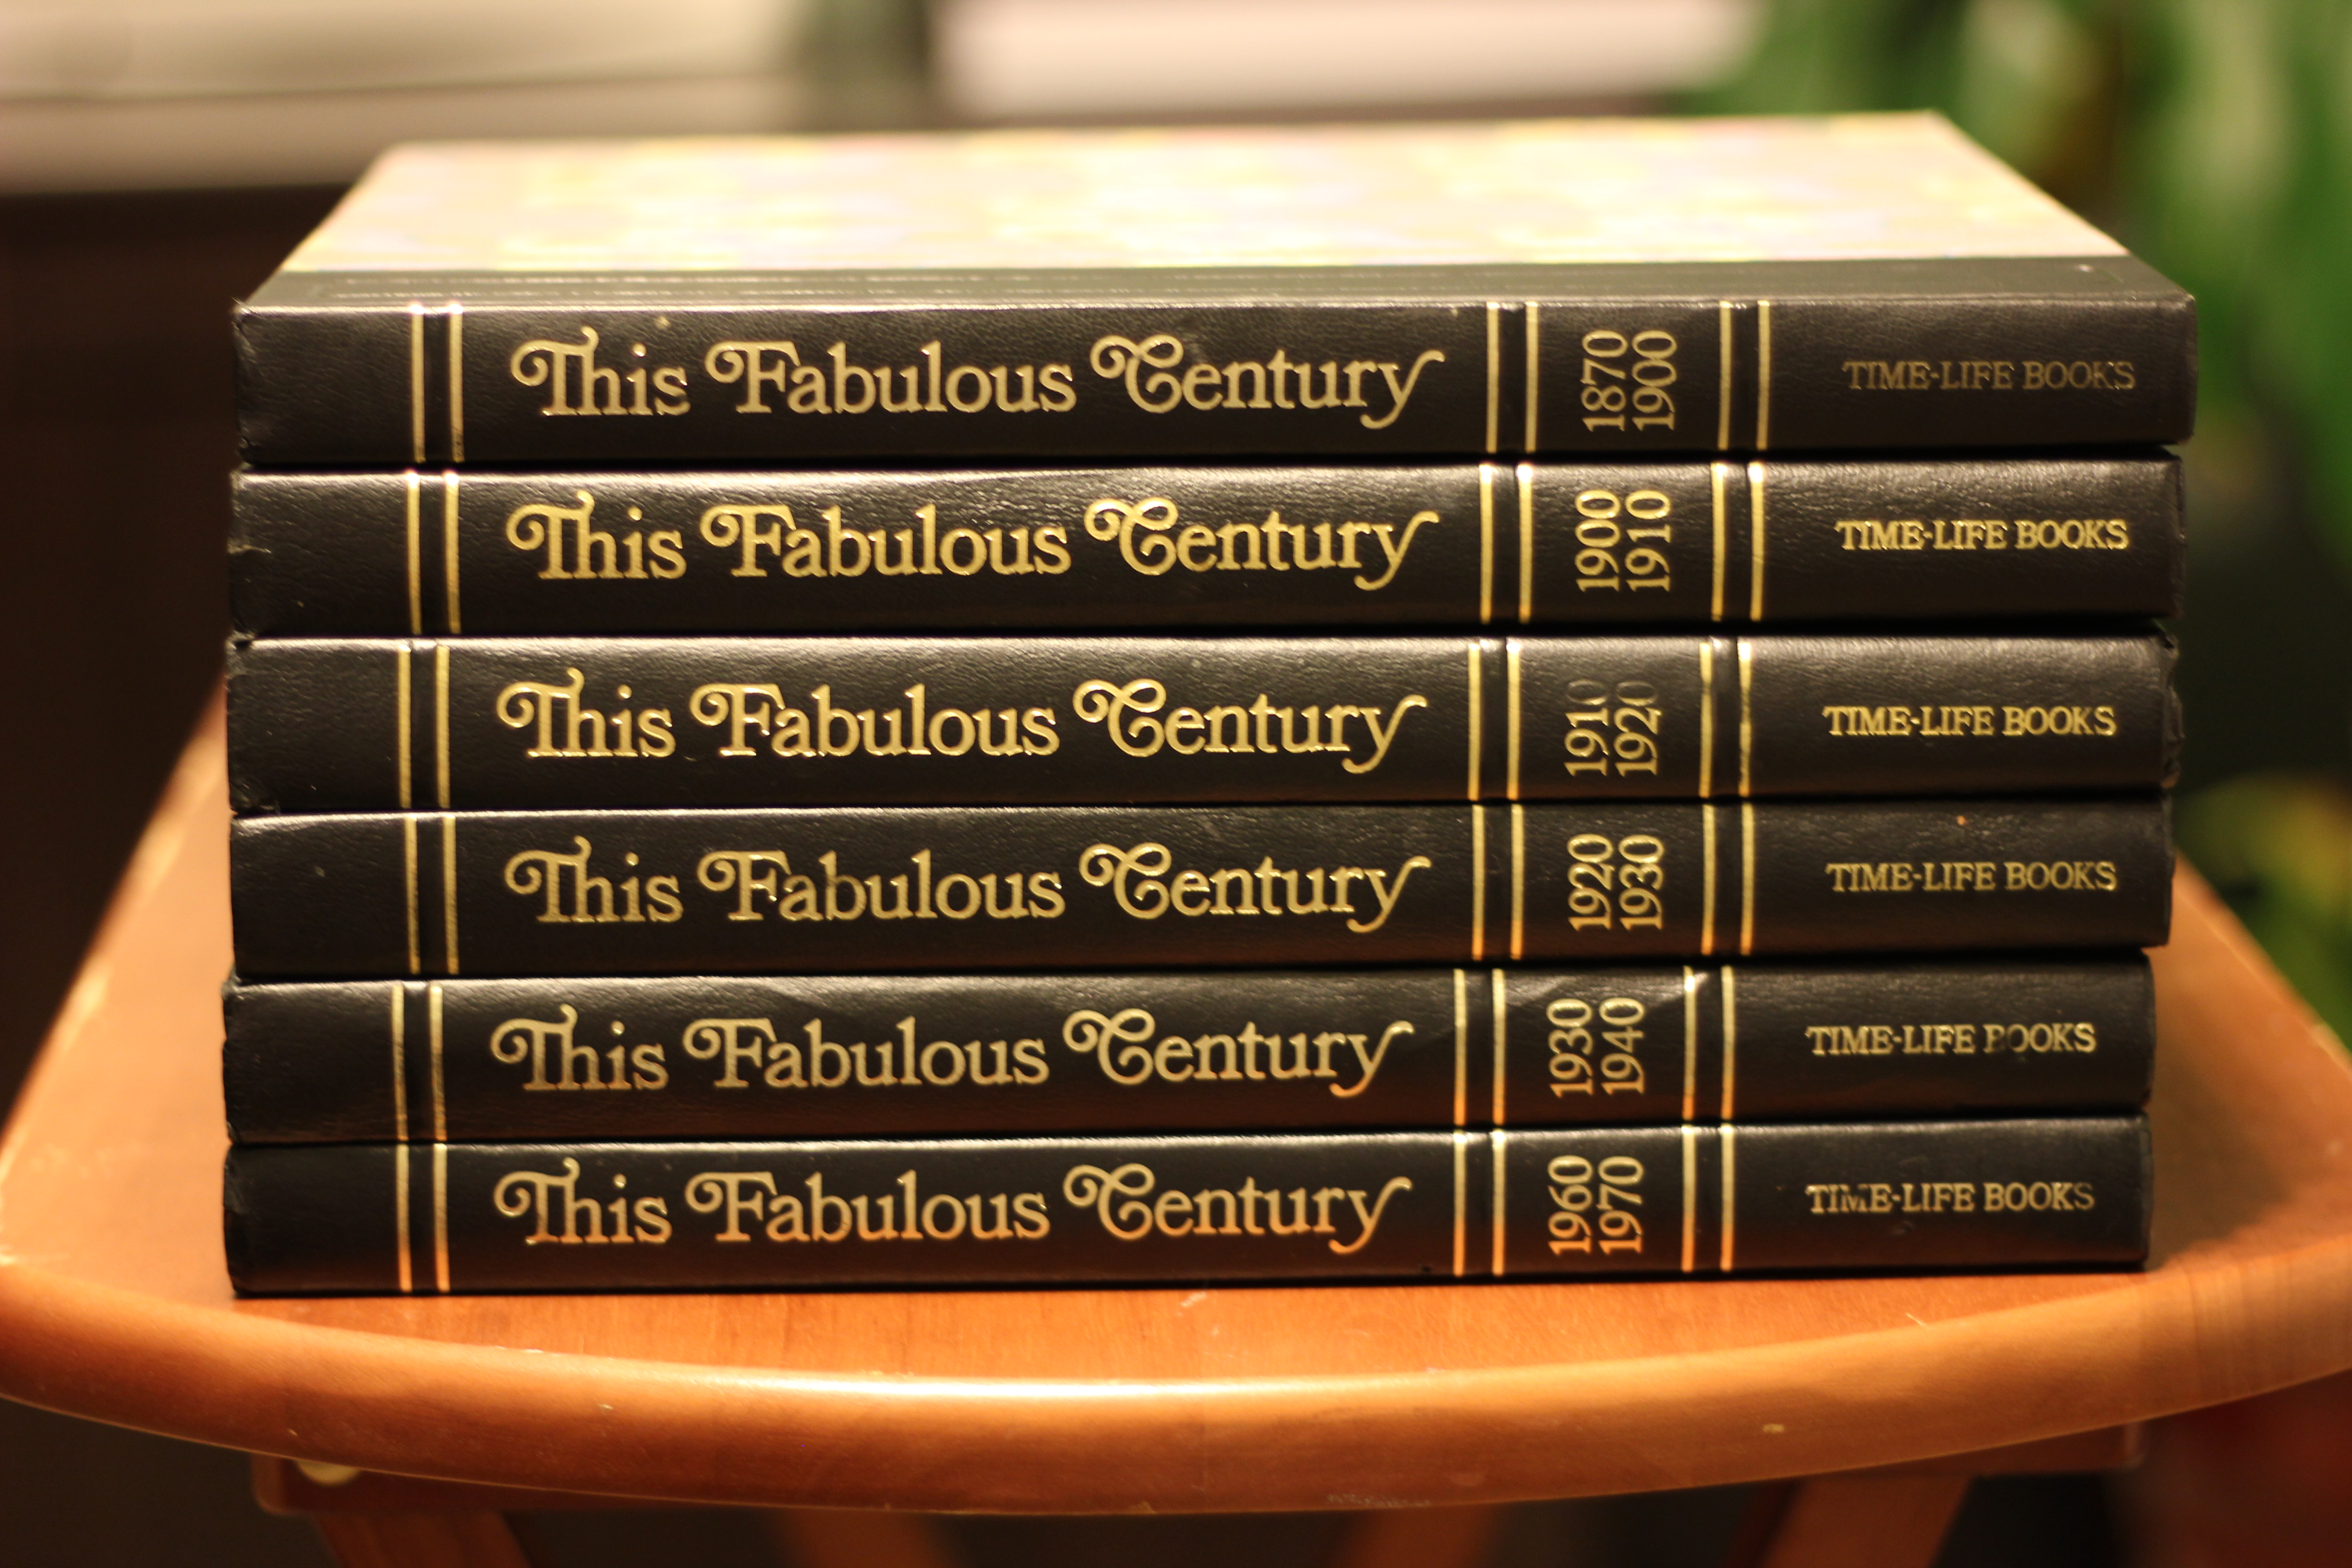 We picked up this wonderful Time Life Series called "This Fabulous Century" It starts with 1870-1900 then each volume is a 10 year span. Sadly 1940-1950 & 1950-1960 were missing, but a quick search on eBay and they are now on their way to me. 